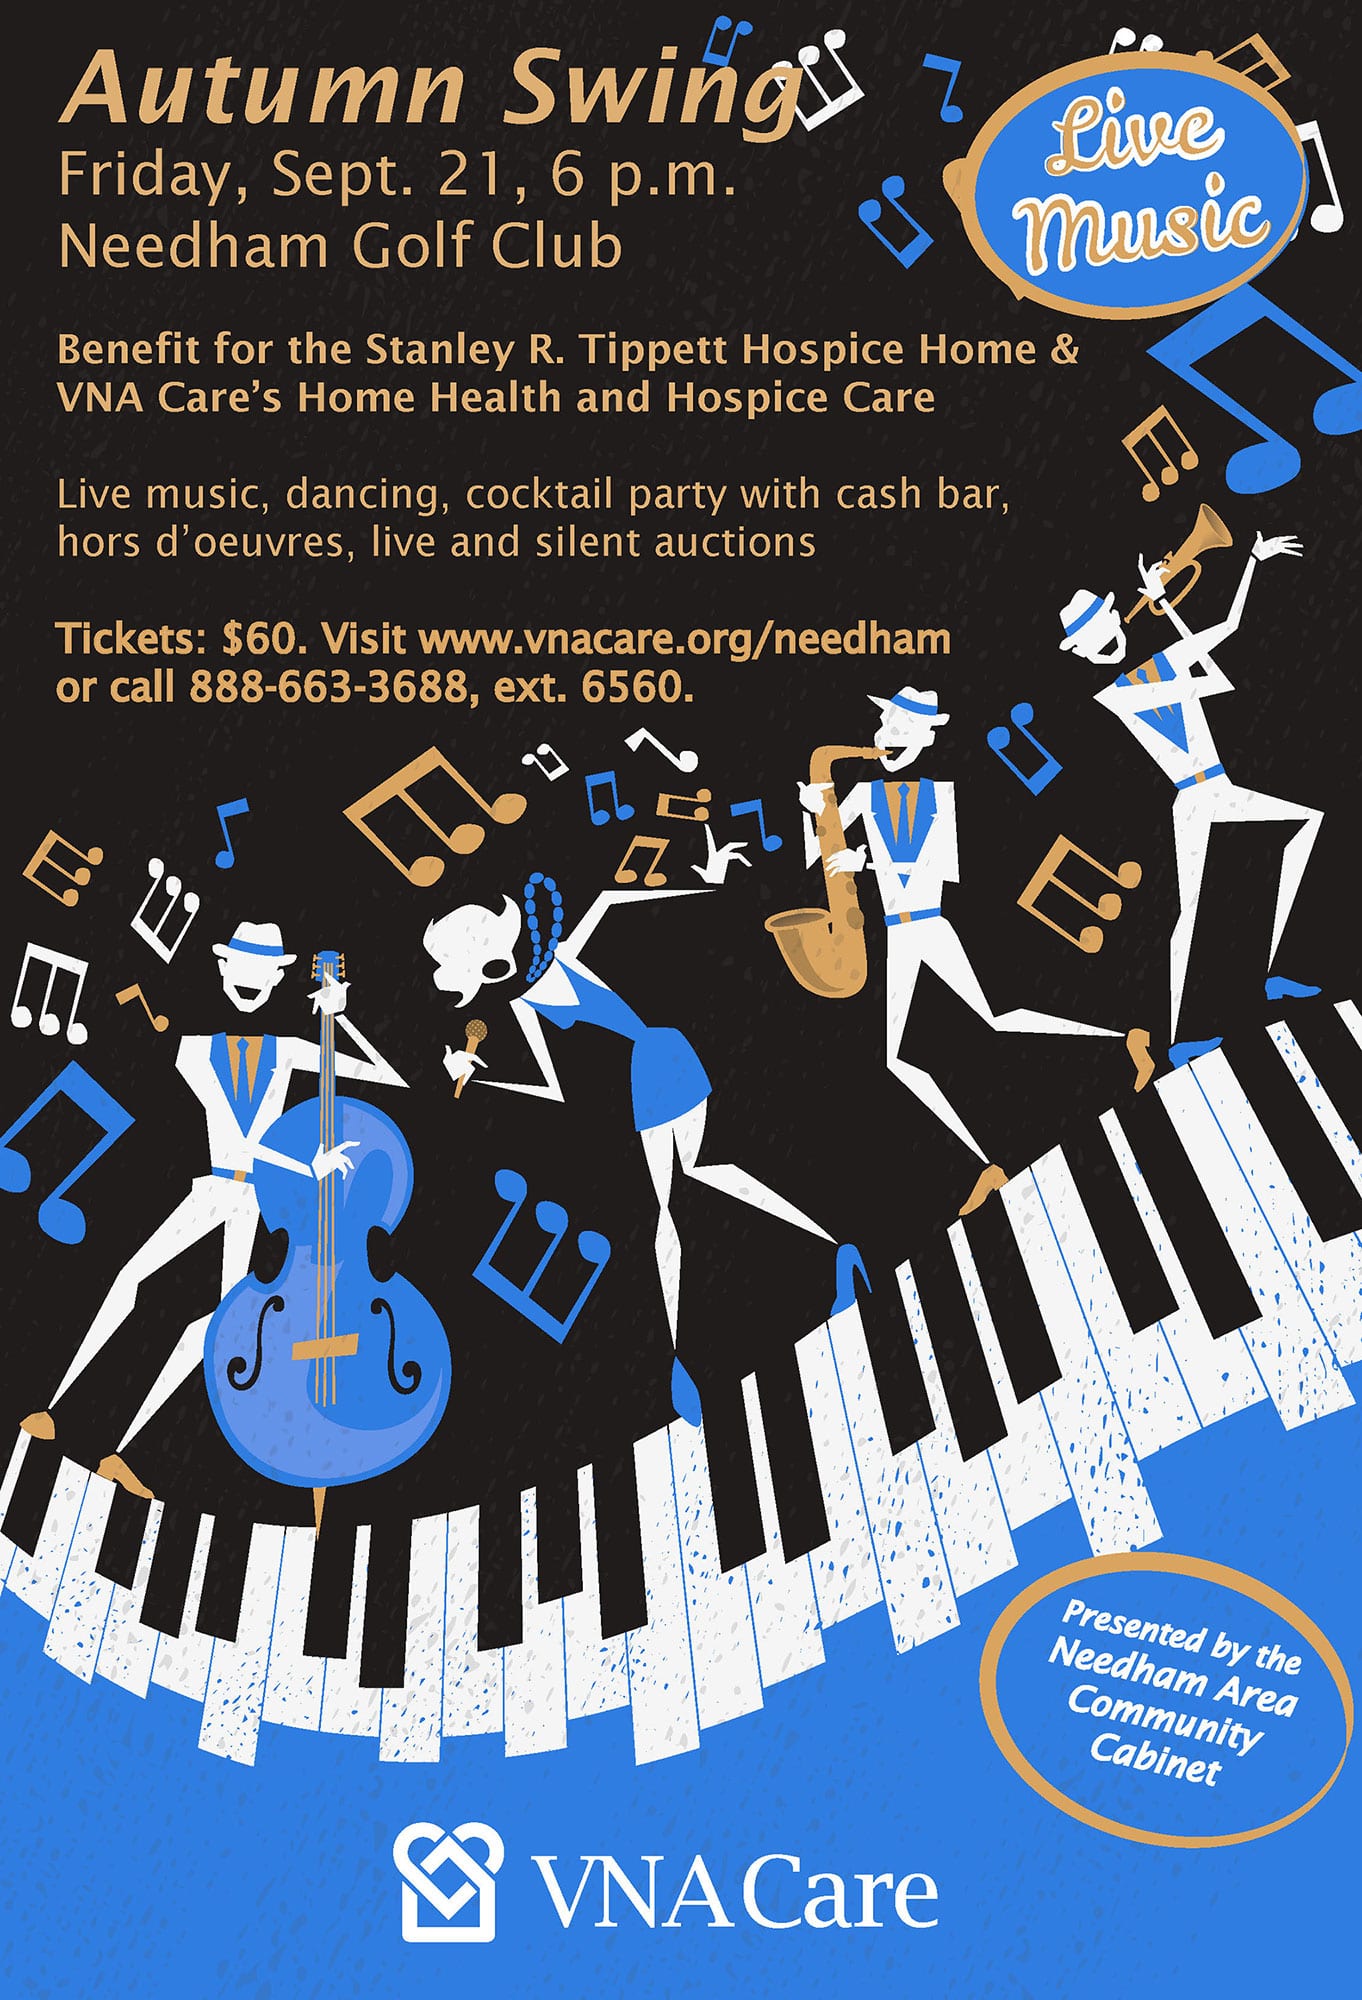 Autumn Swing to benefit VNA Care and the Tippett Hospice Home